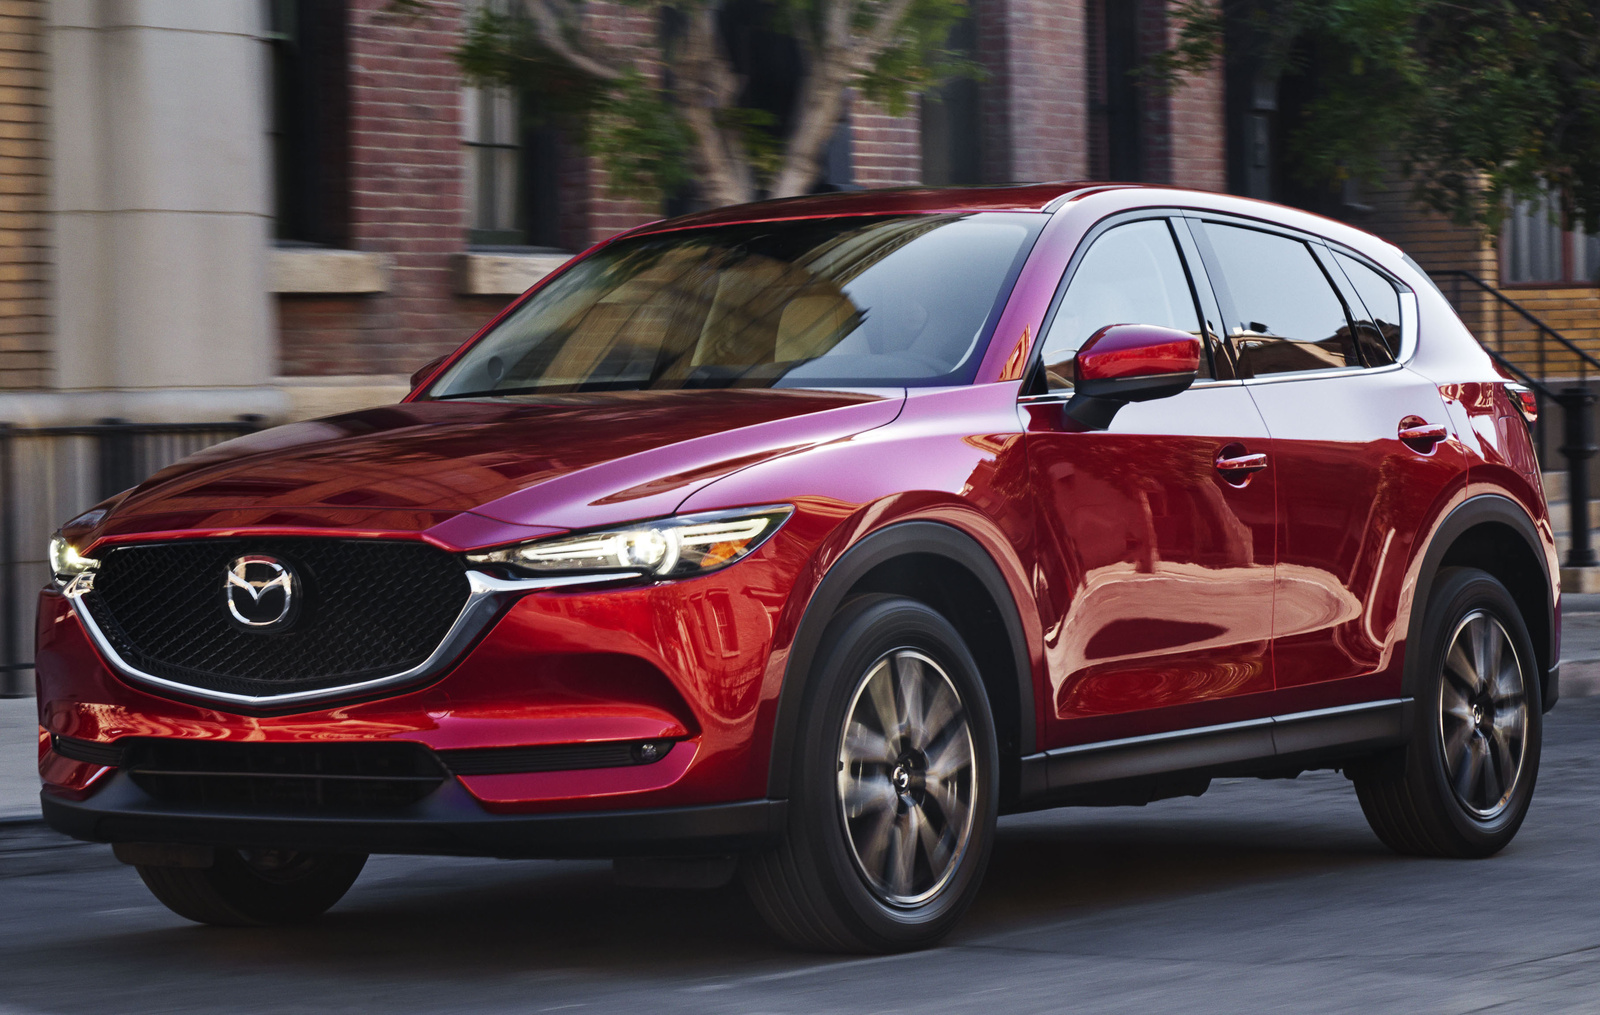 2022 Mazda CX-5 Review  An SUV for sporty car lovers - Autoblog